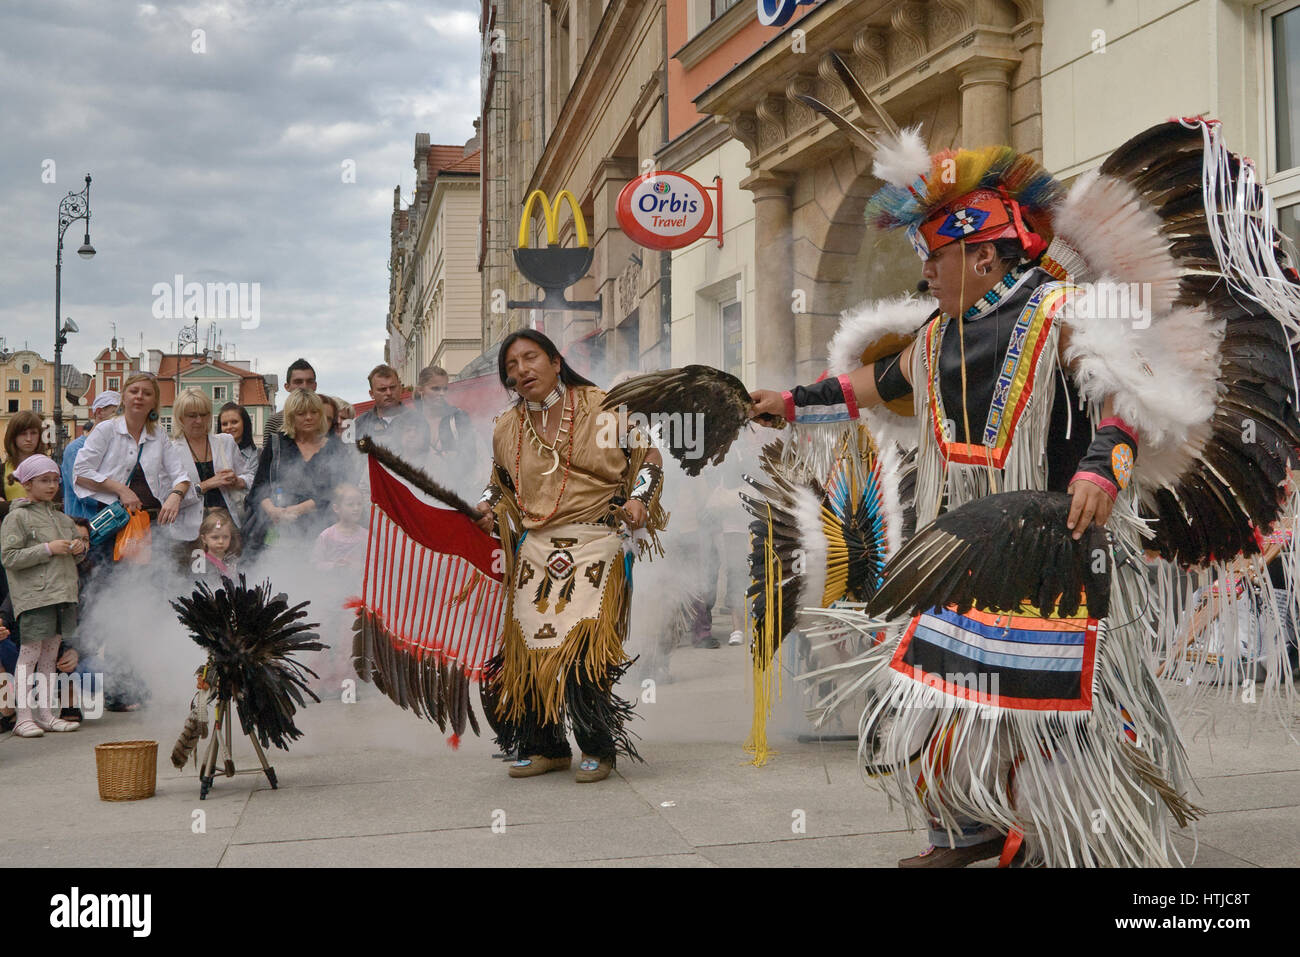 South American Indians performing at Rynek (Market Square) in Wroclaw, Lower Silesia region, Poland Stock Photo